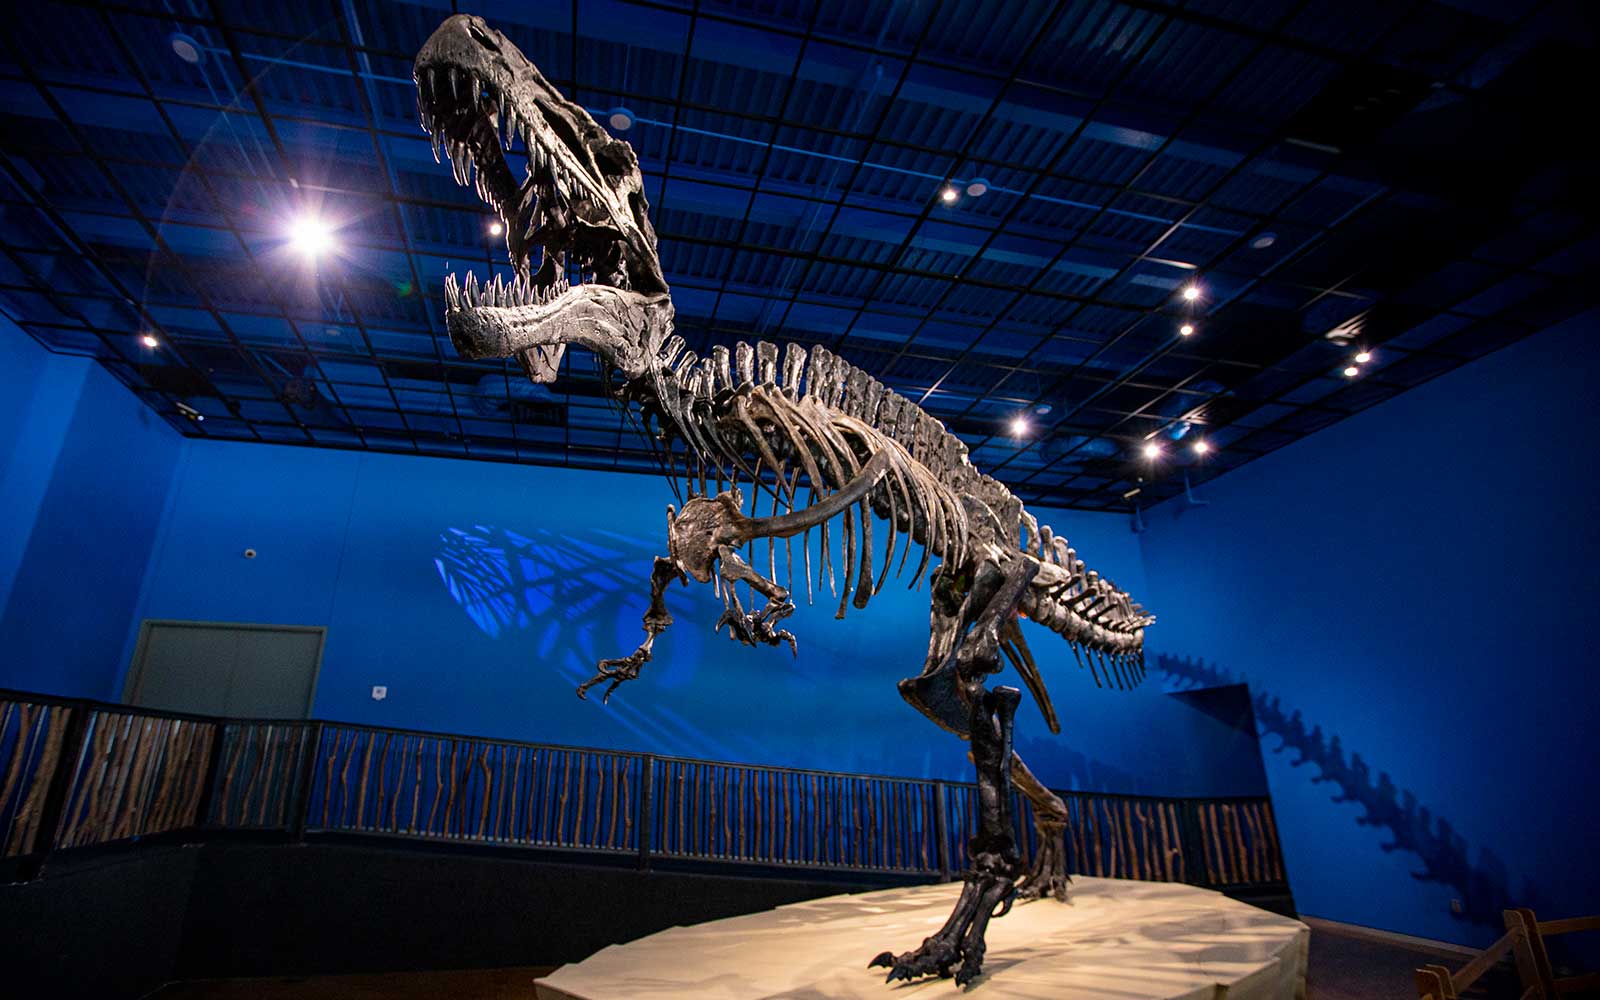 Dinorsaur skeleton in at the Museum of the Red River in Idabel, Oklahoma. Oklahoma's state dinosaur.